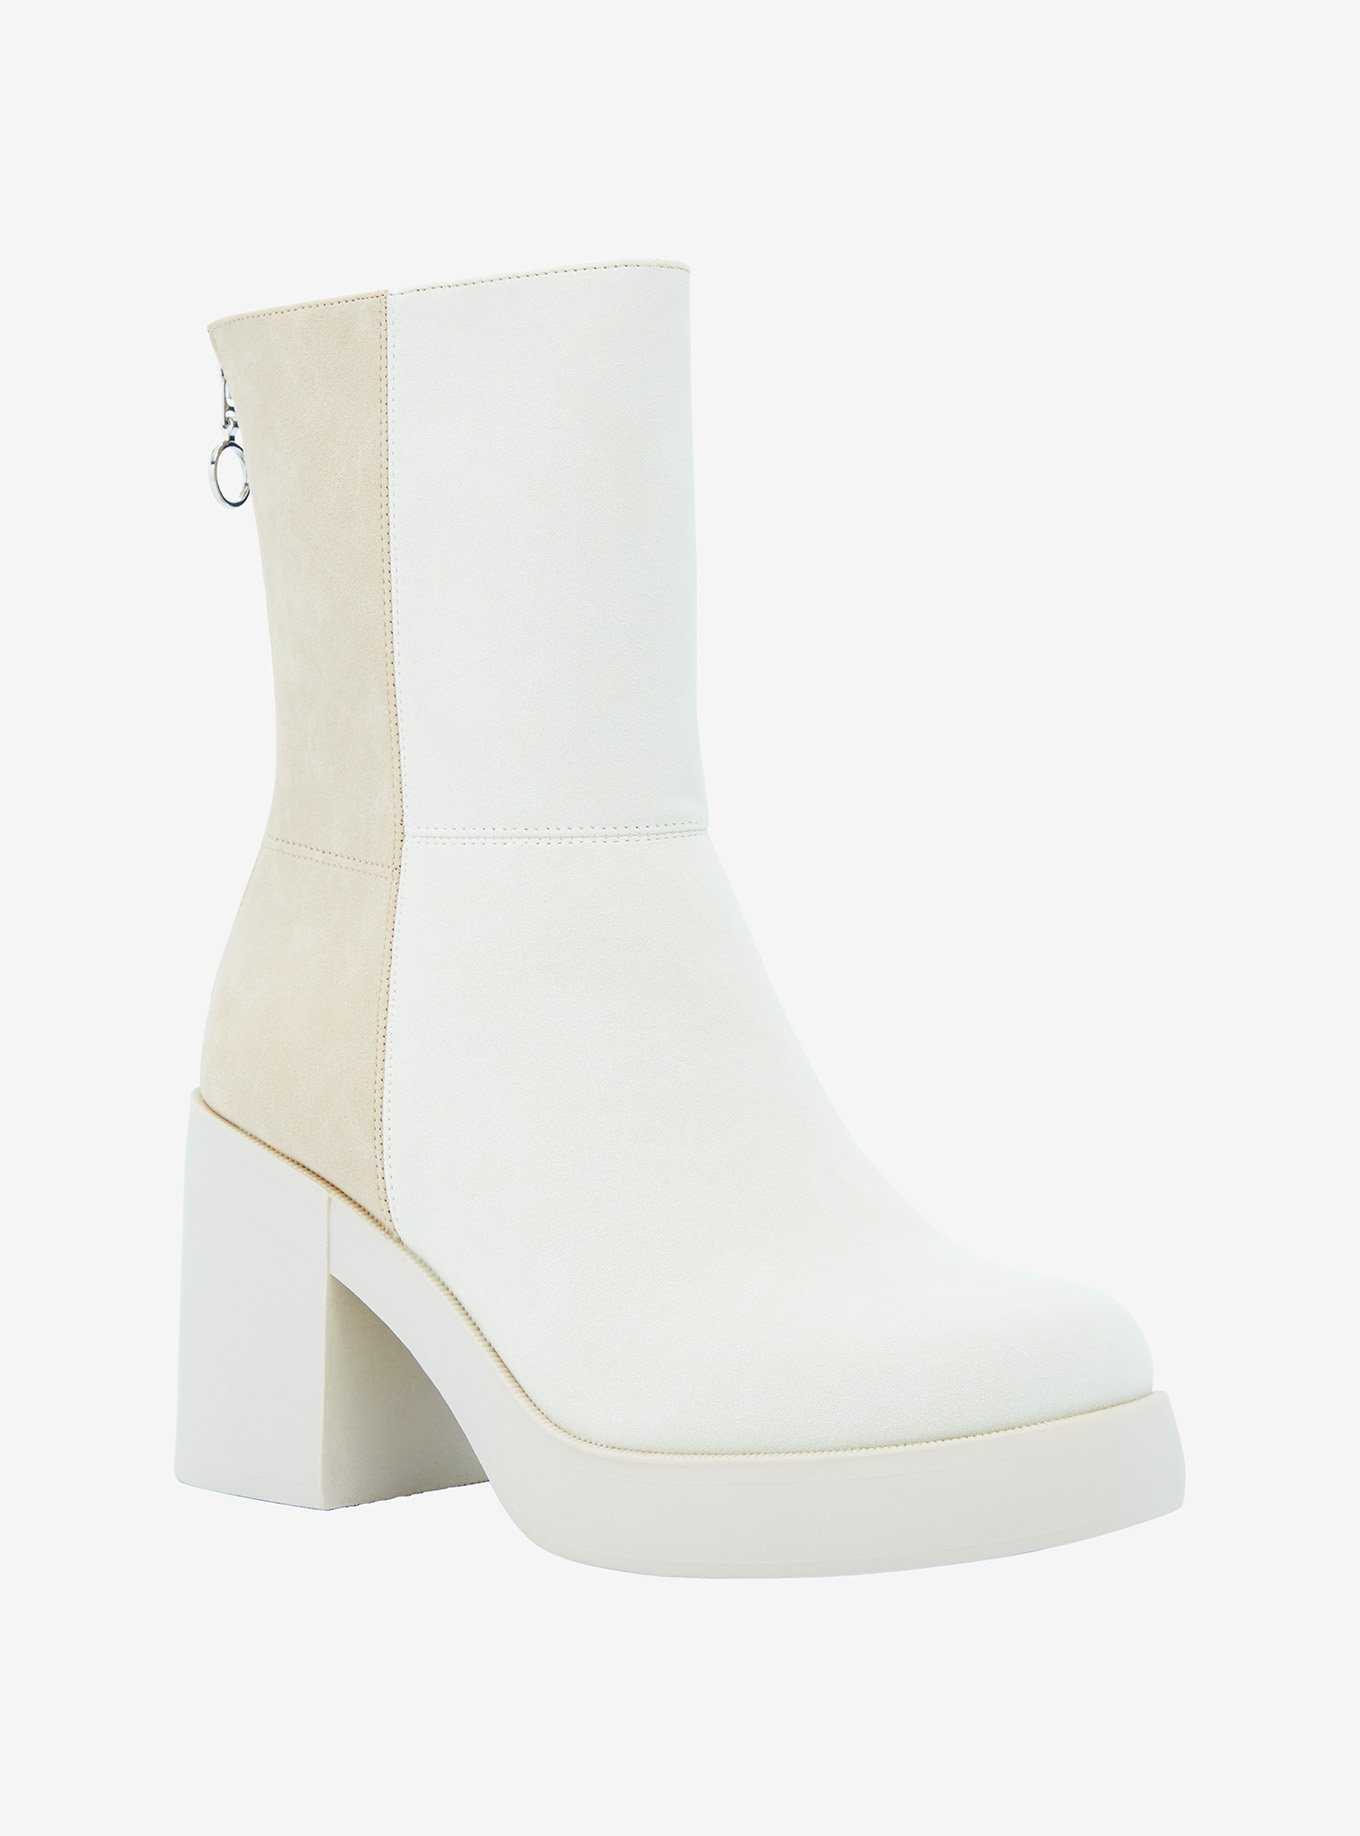 Dirty Laundry Cream & Taupe Color-Block Heel Boots, , hi-res